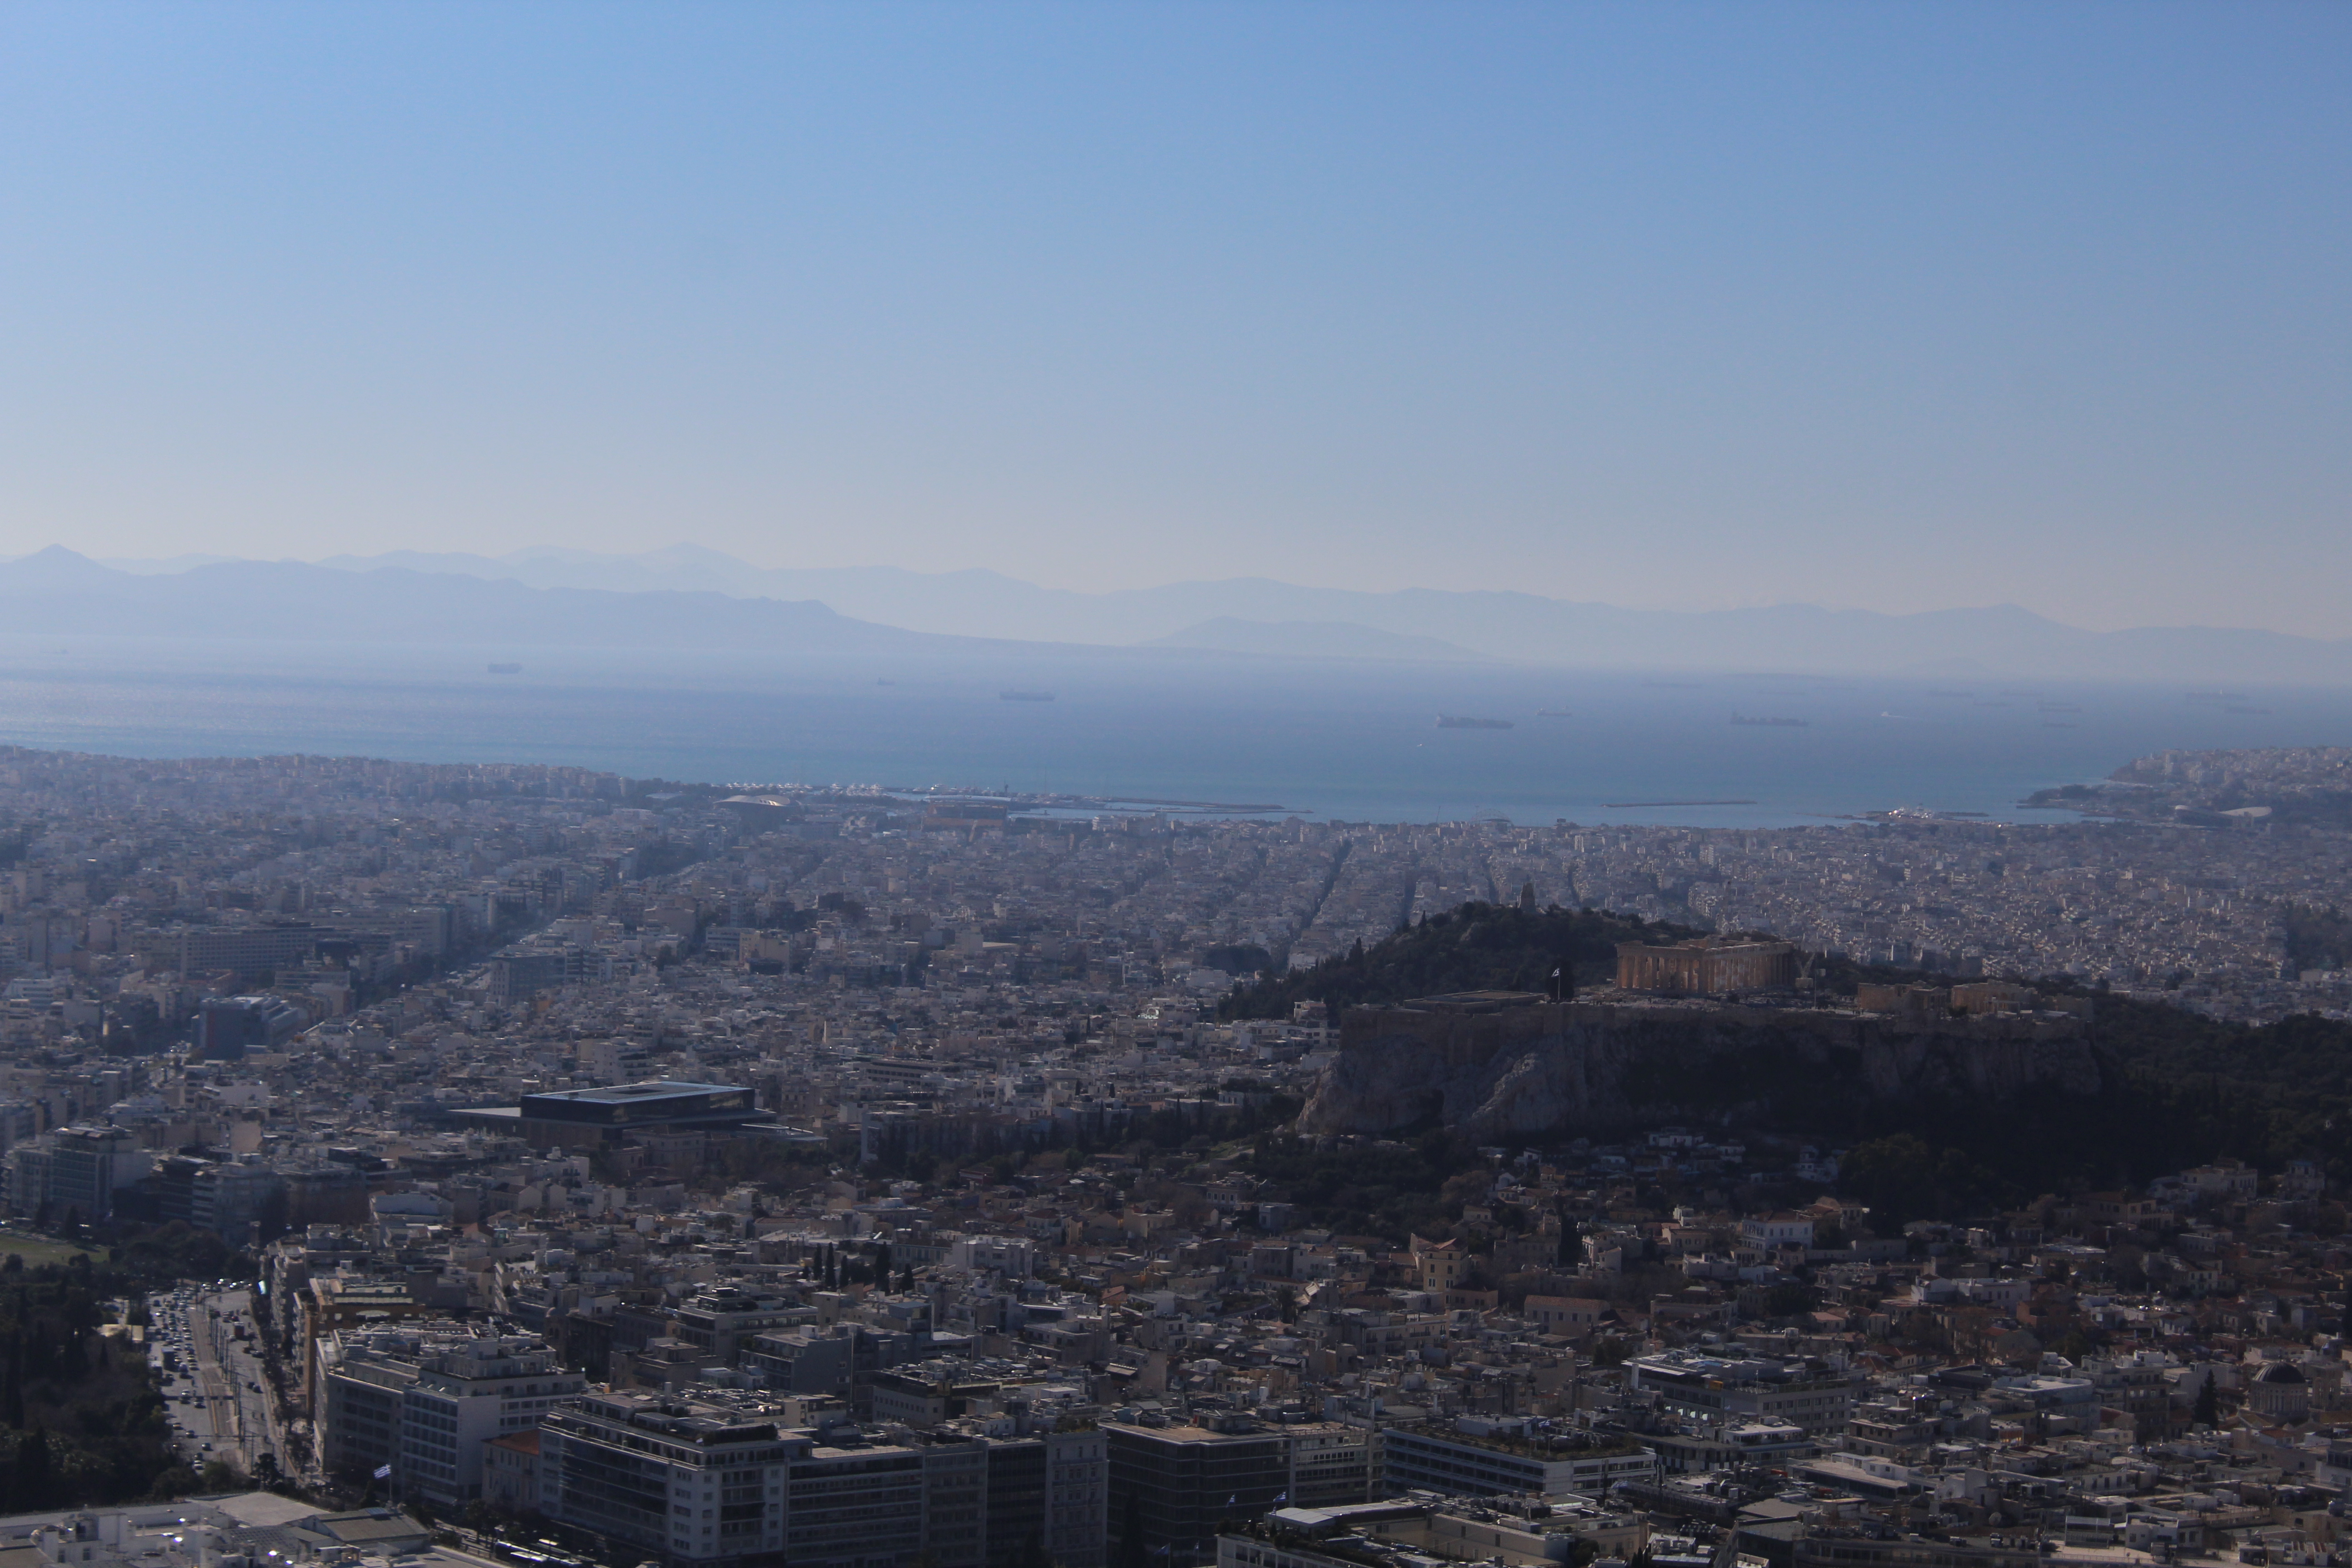 The view from Lycabettus hill gives you a glimpse of all of Athens